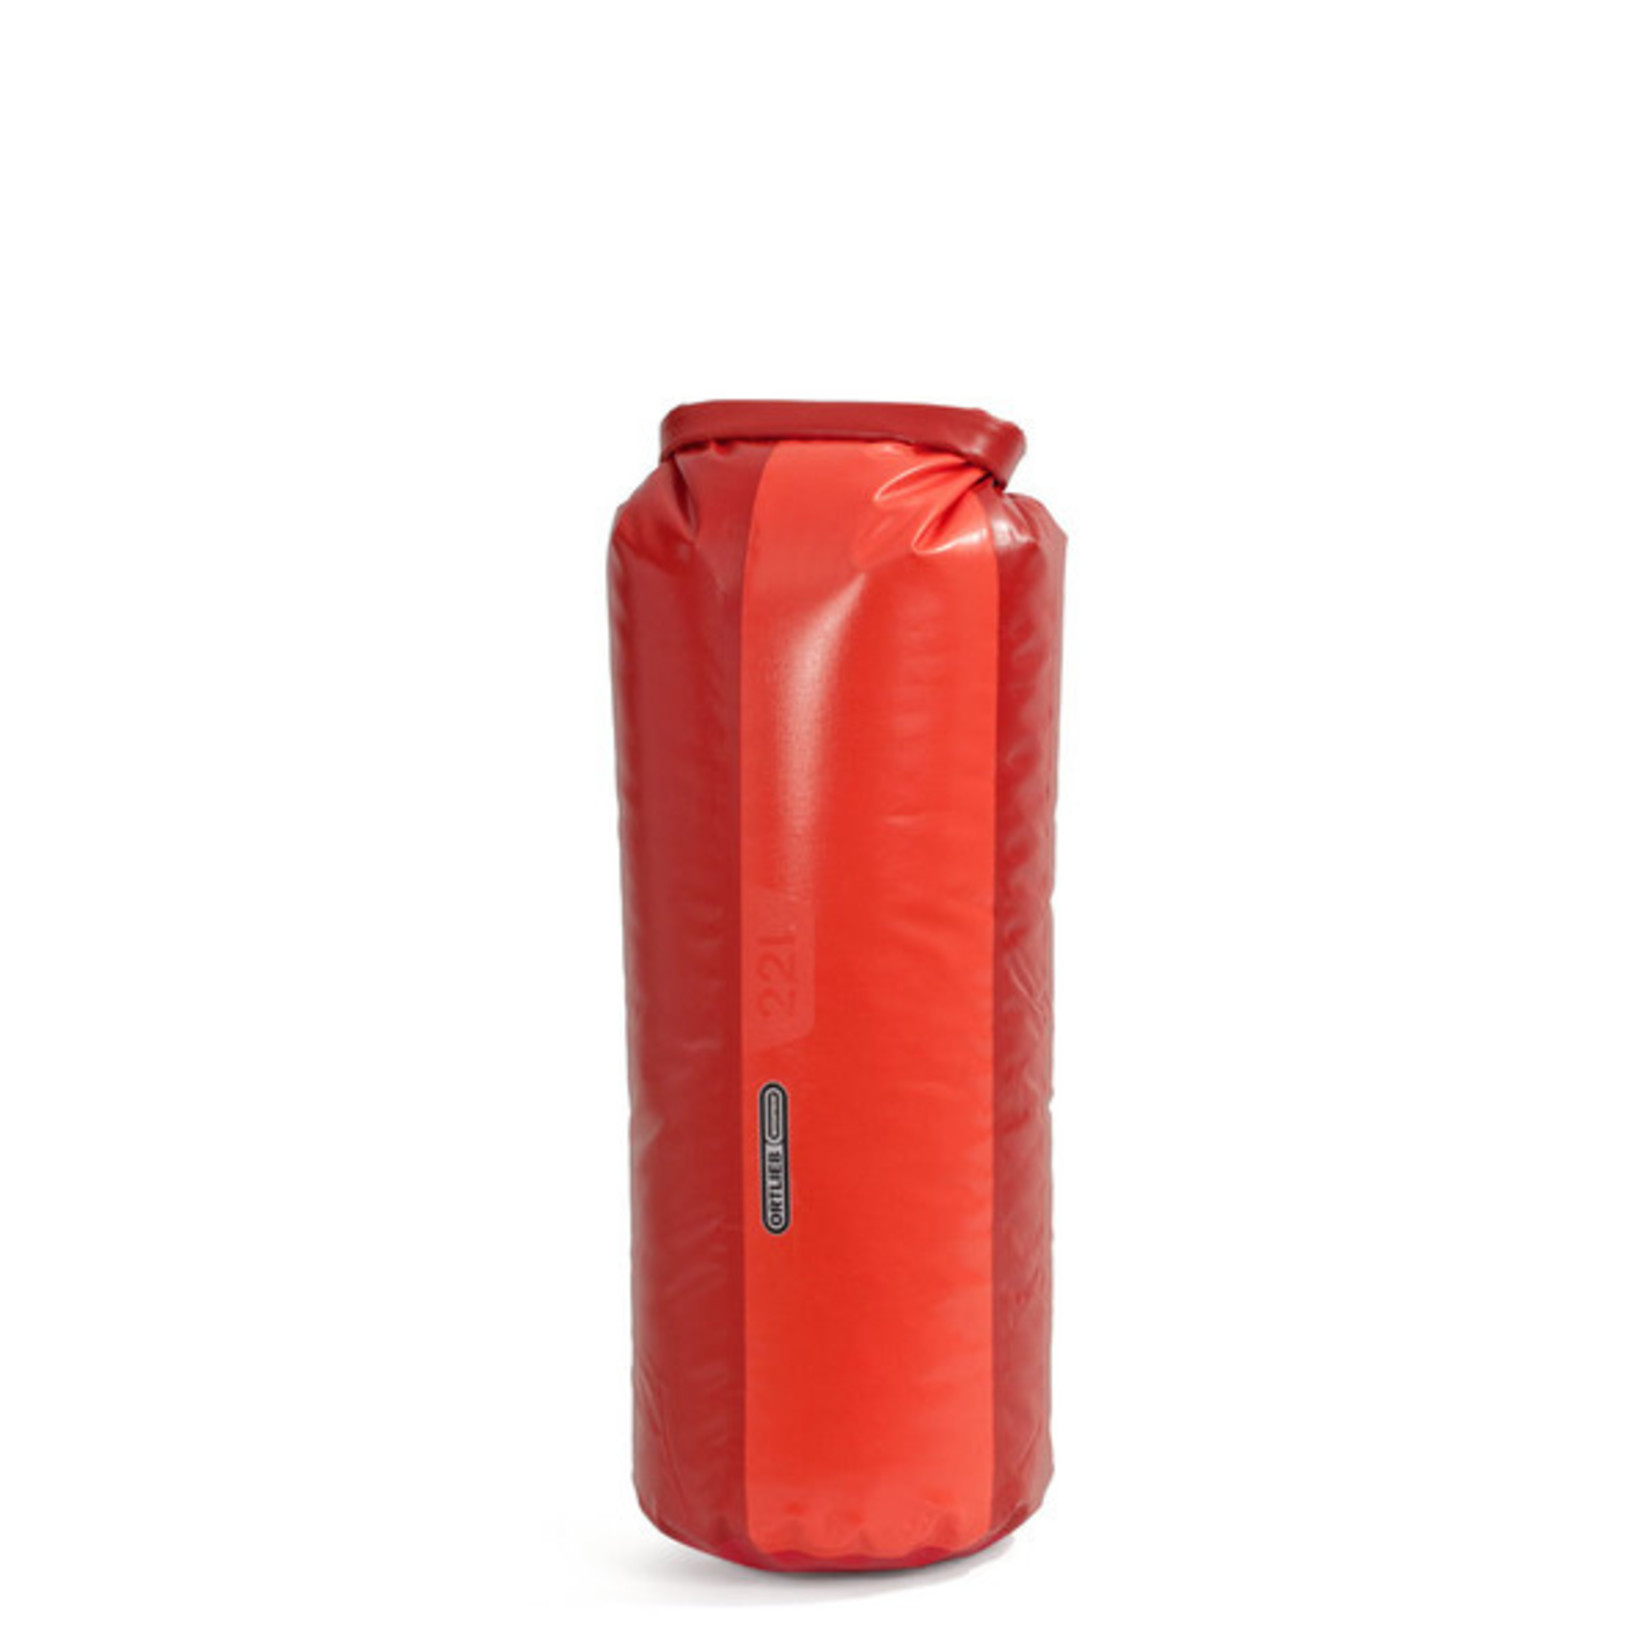 Ortlieb New Ortlieb PD 350 Dry Bag K4552 - 15-20cm/5-8Inch - 22L - Cranberry-Signal Red